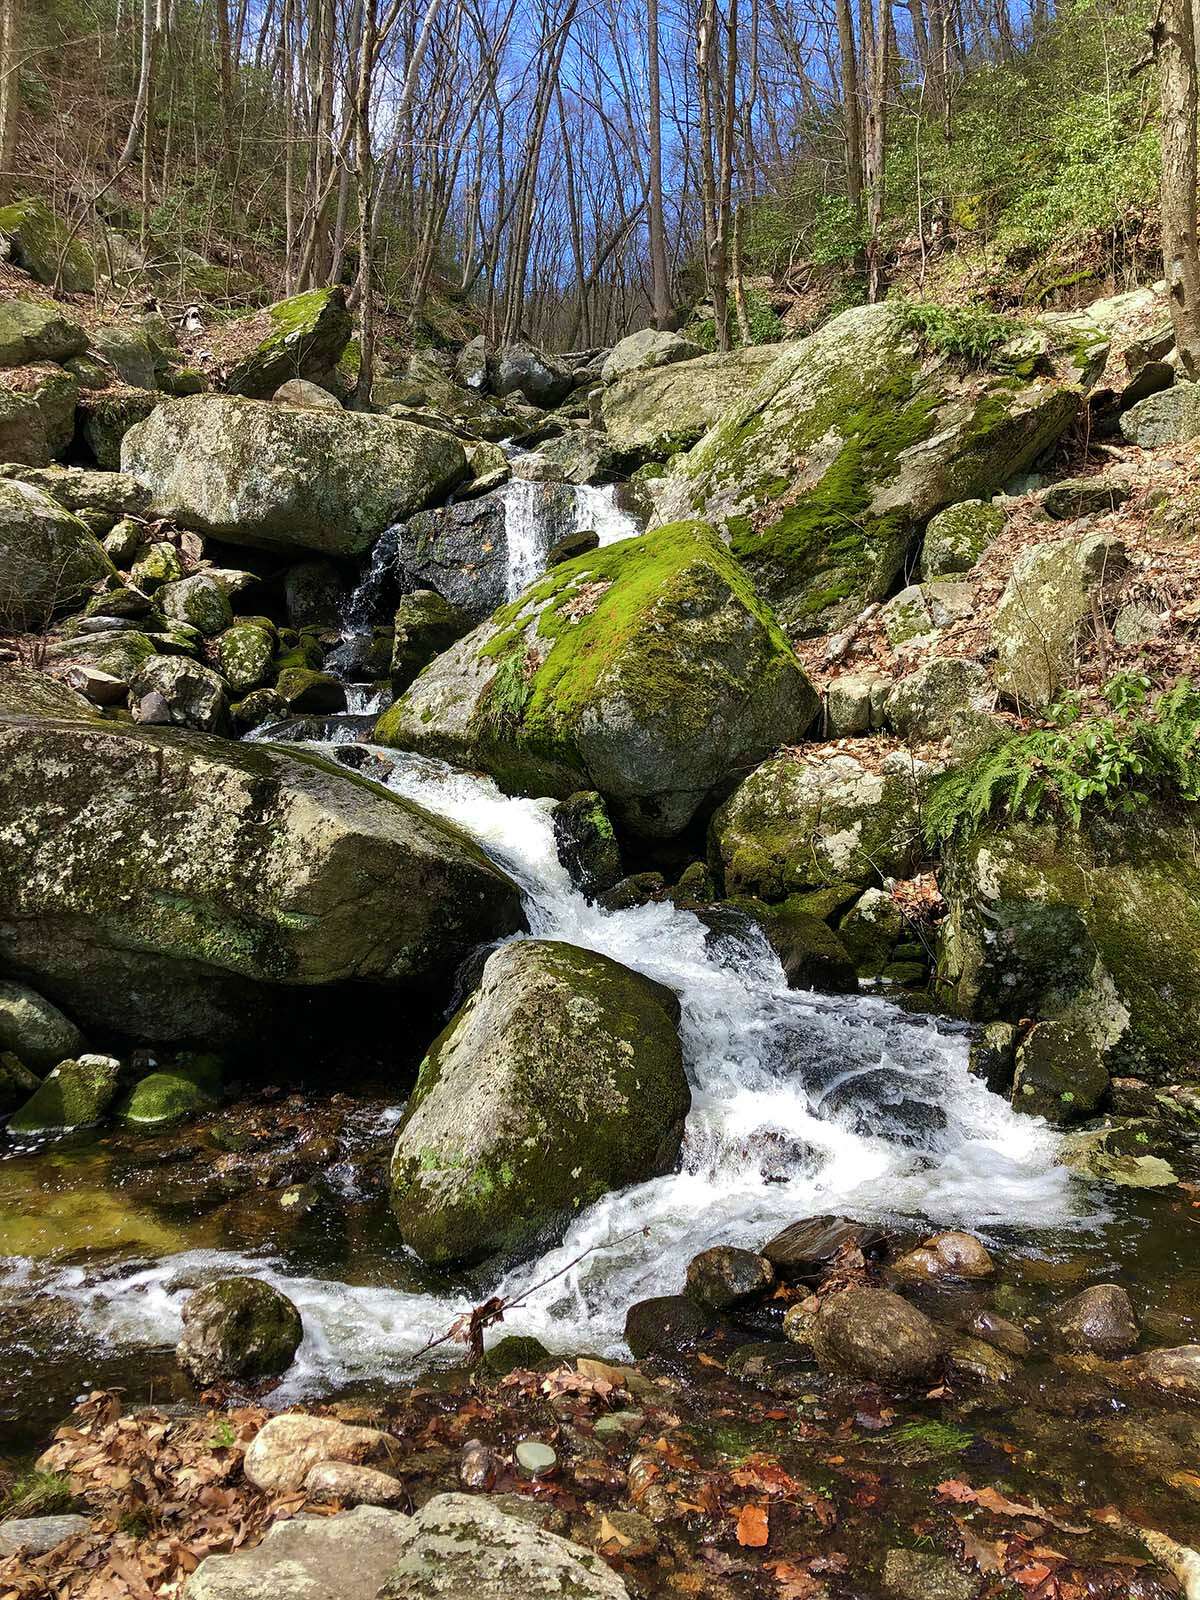 A side trail takes visitors along the side of Cussgutter Brook Cascades.